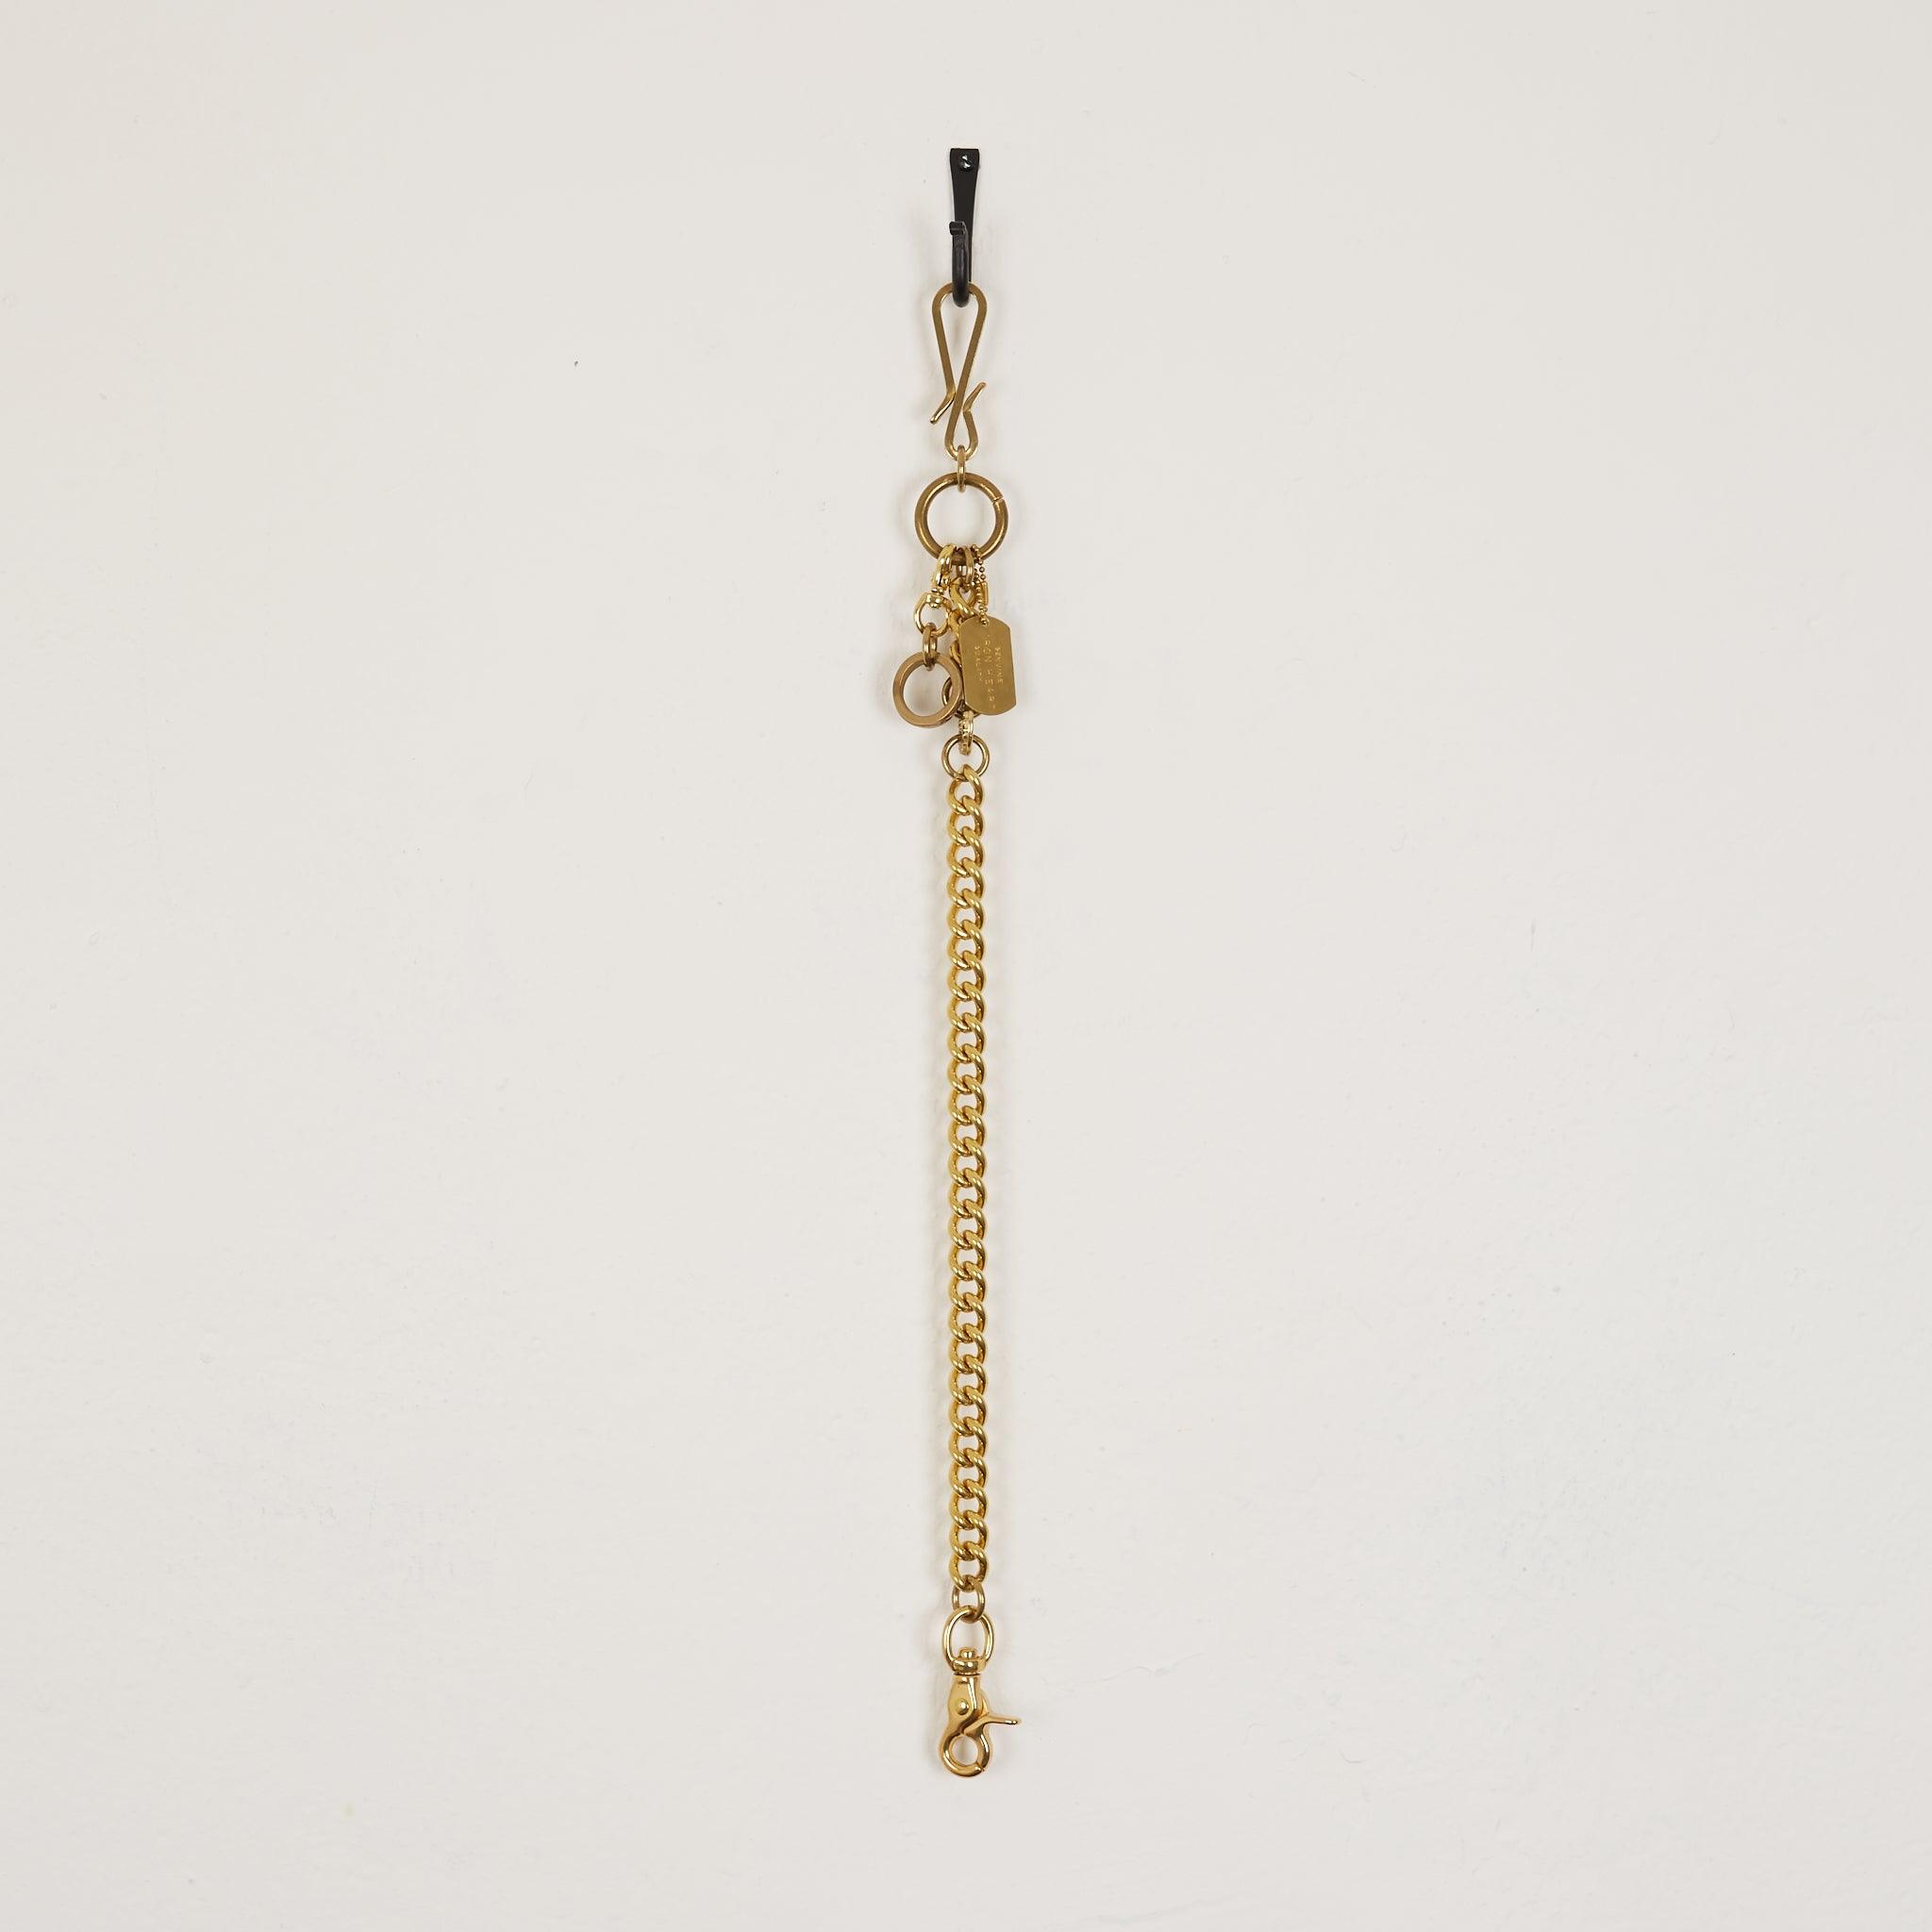 Brass-W6 - Wallet Chain with Hook and Rings Brass